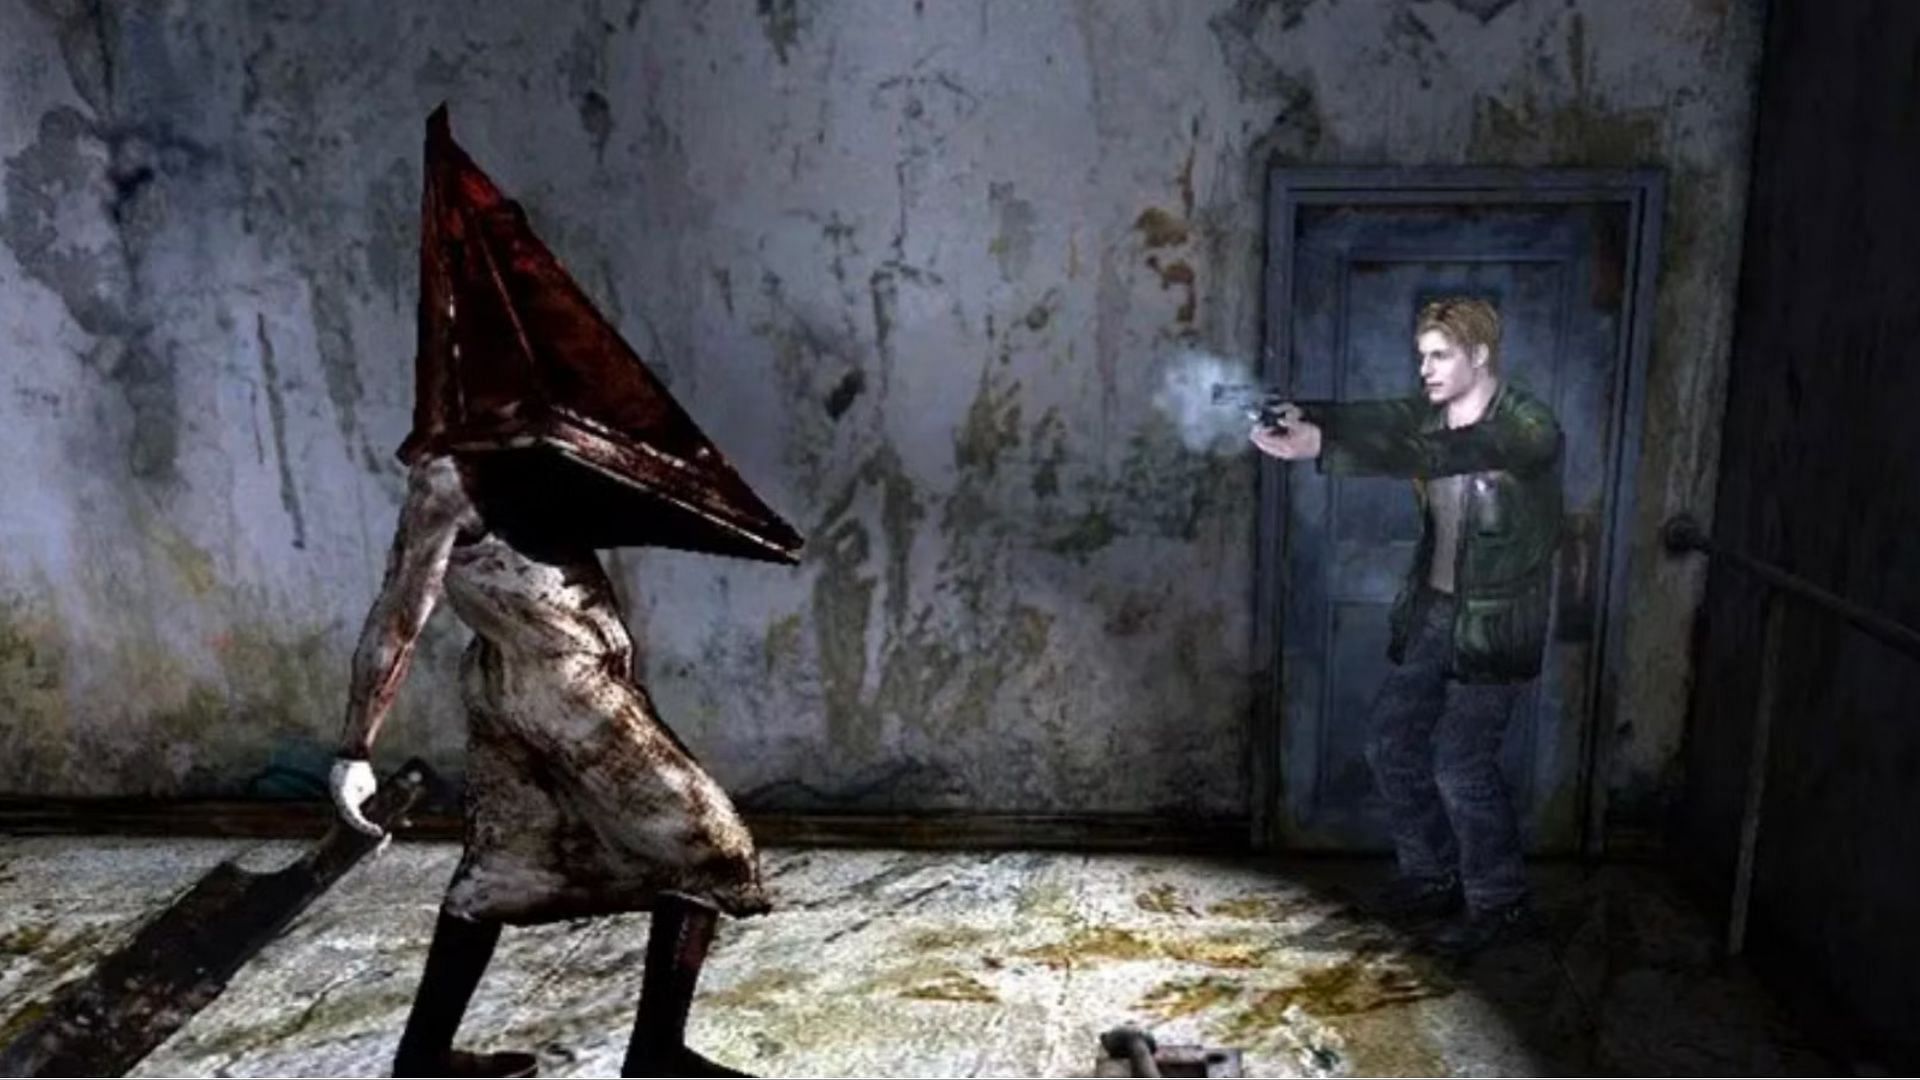 The Pyramid Head has earned a significant following among dedicated horror gamers (Image via Konami)